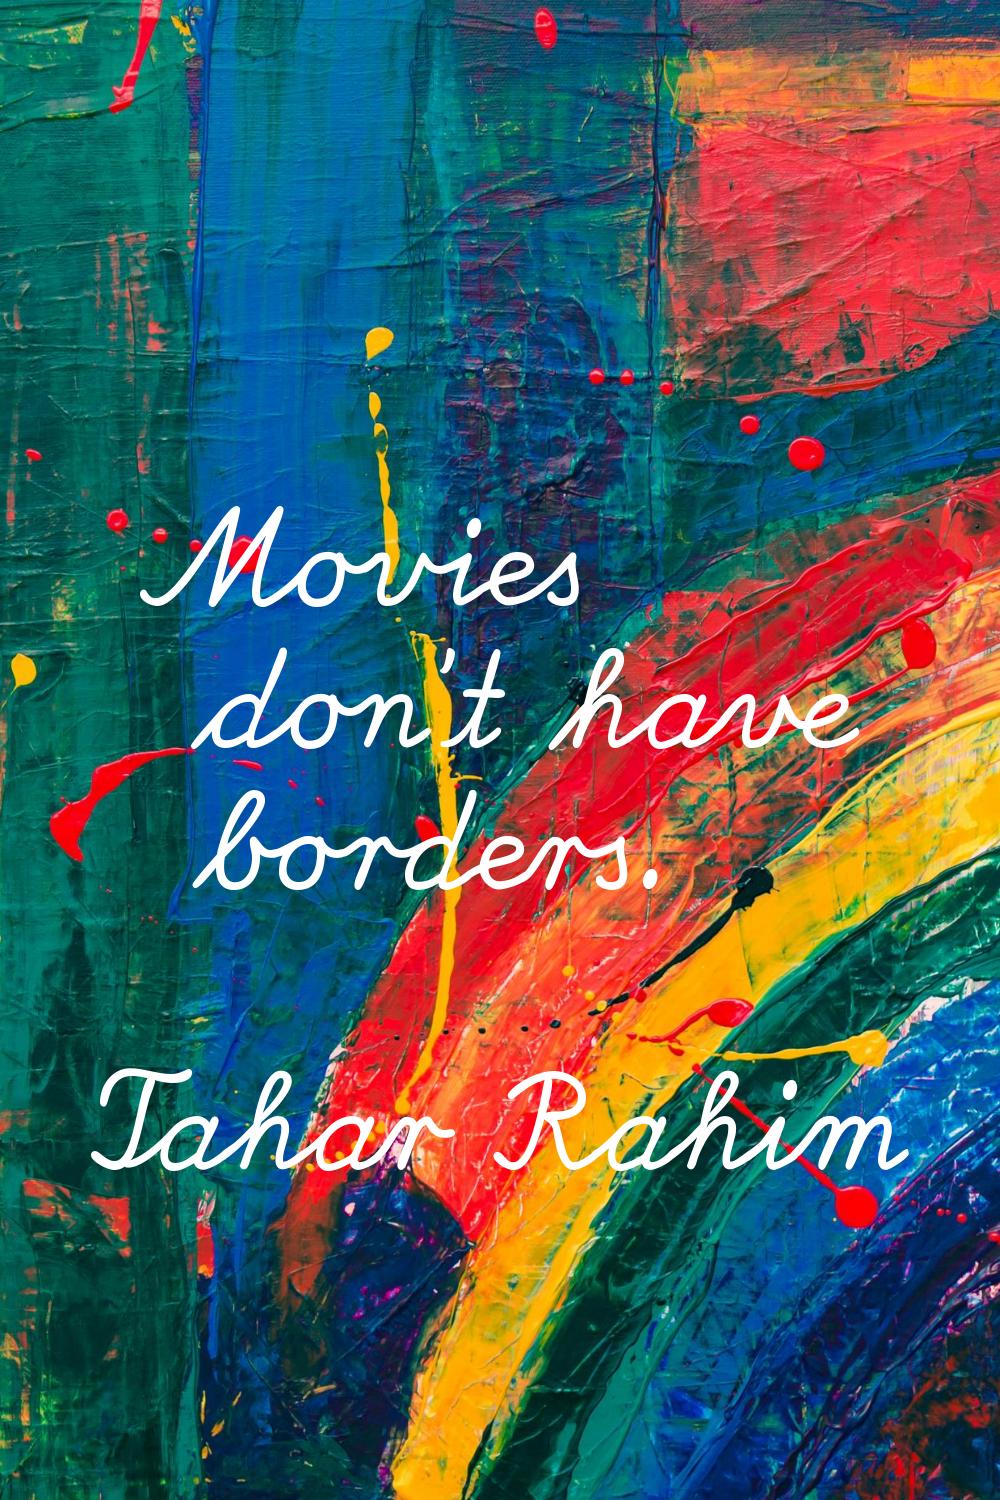 Movies don't have borders.